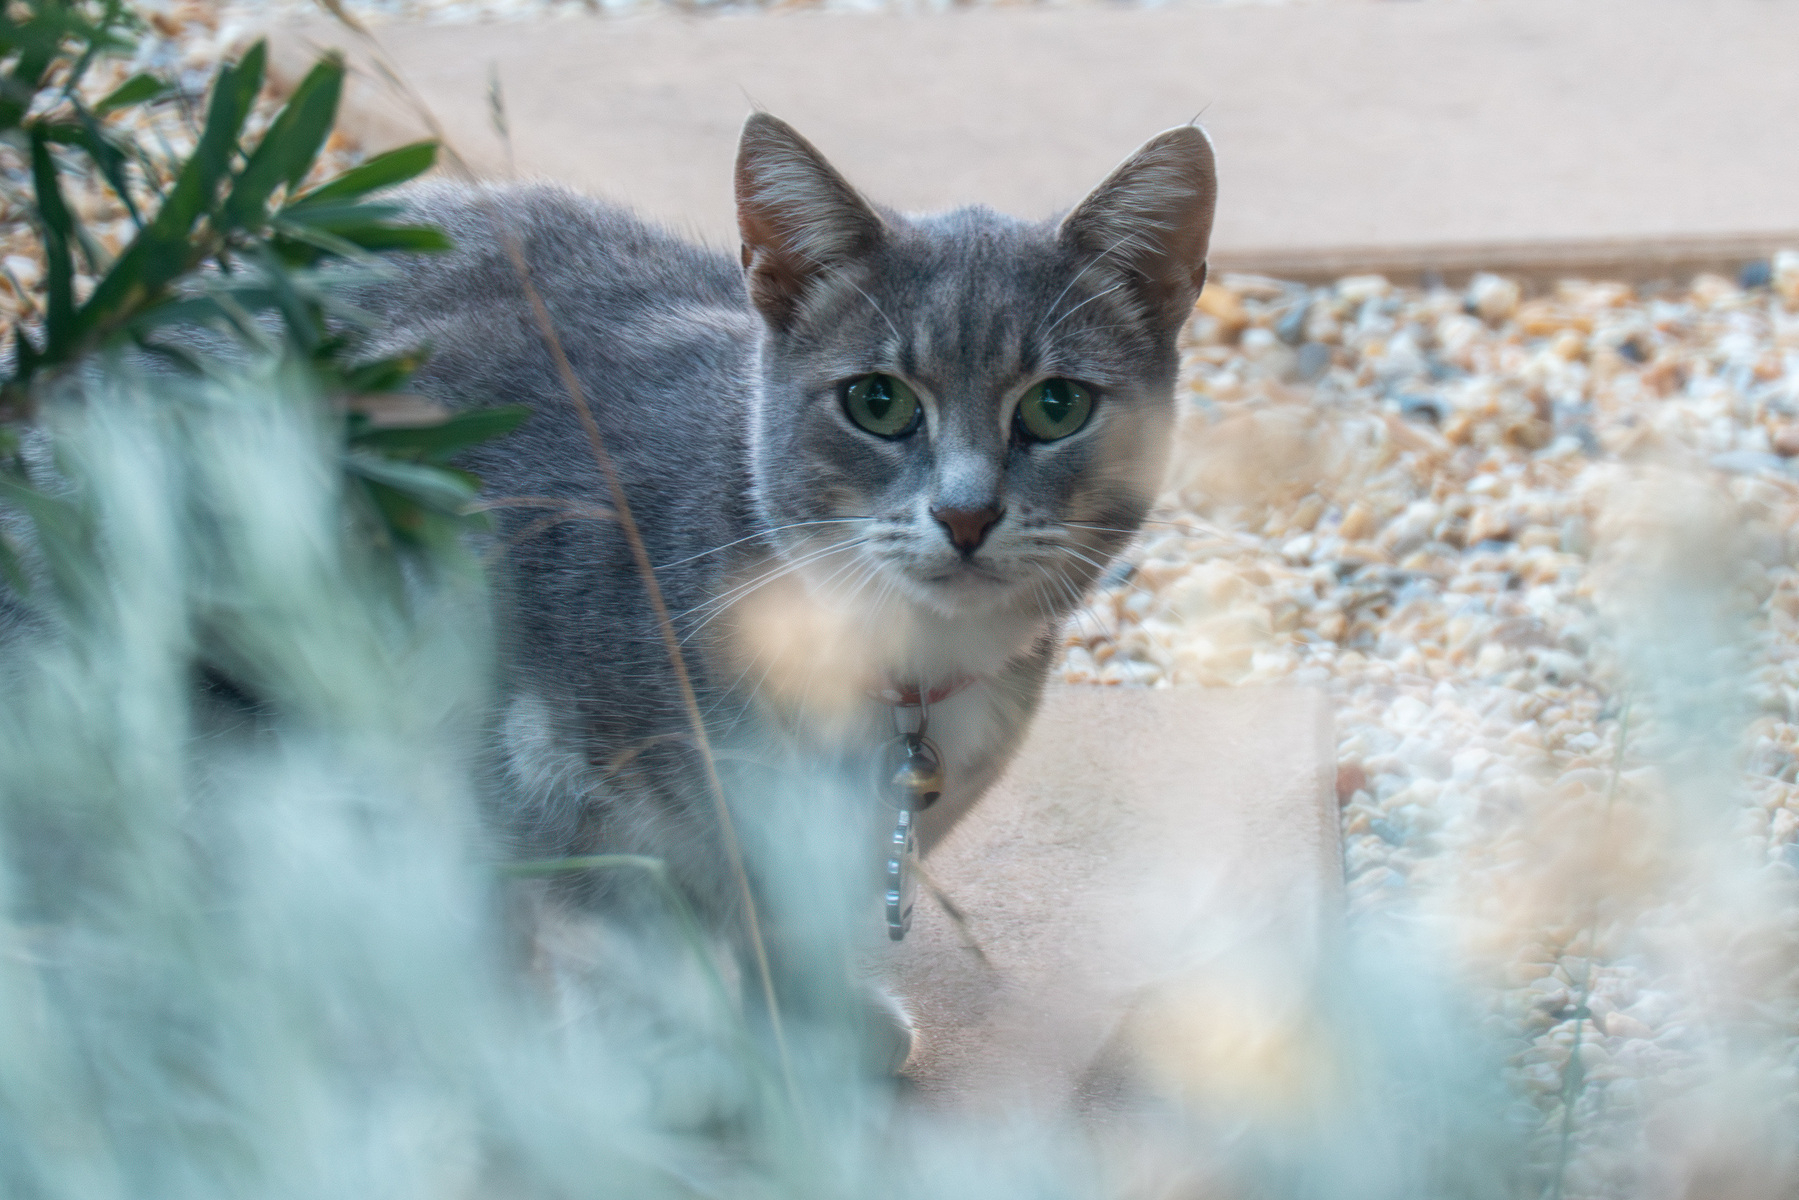 A small grey cat looking at the camera from behind some out of focus bushes.